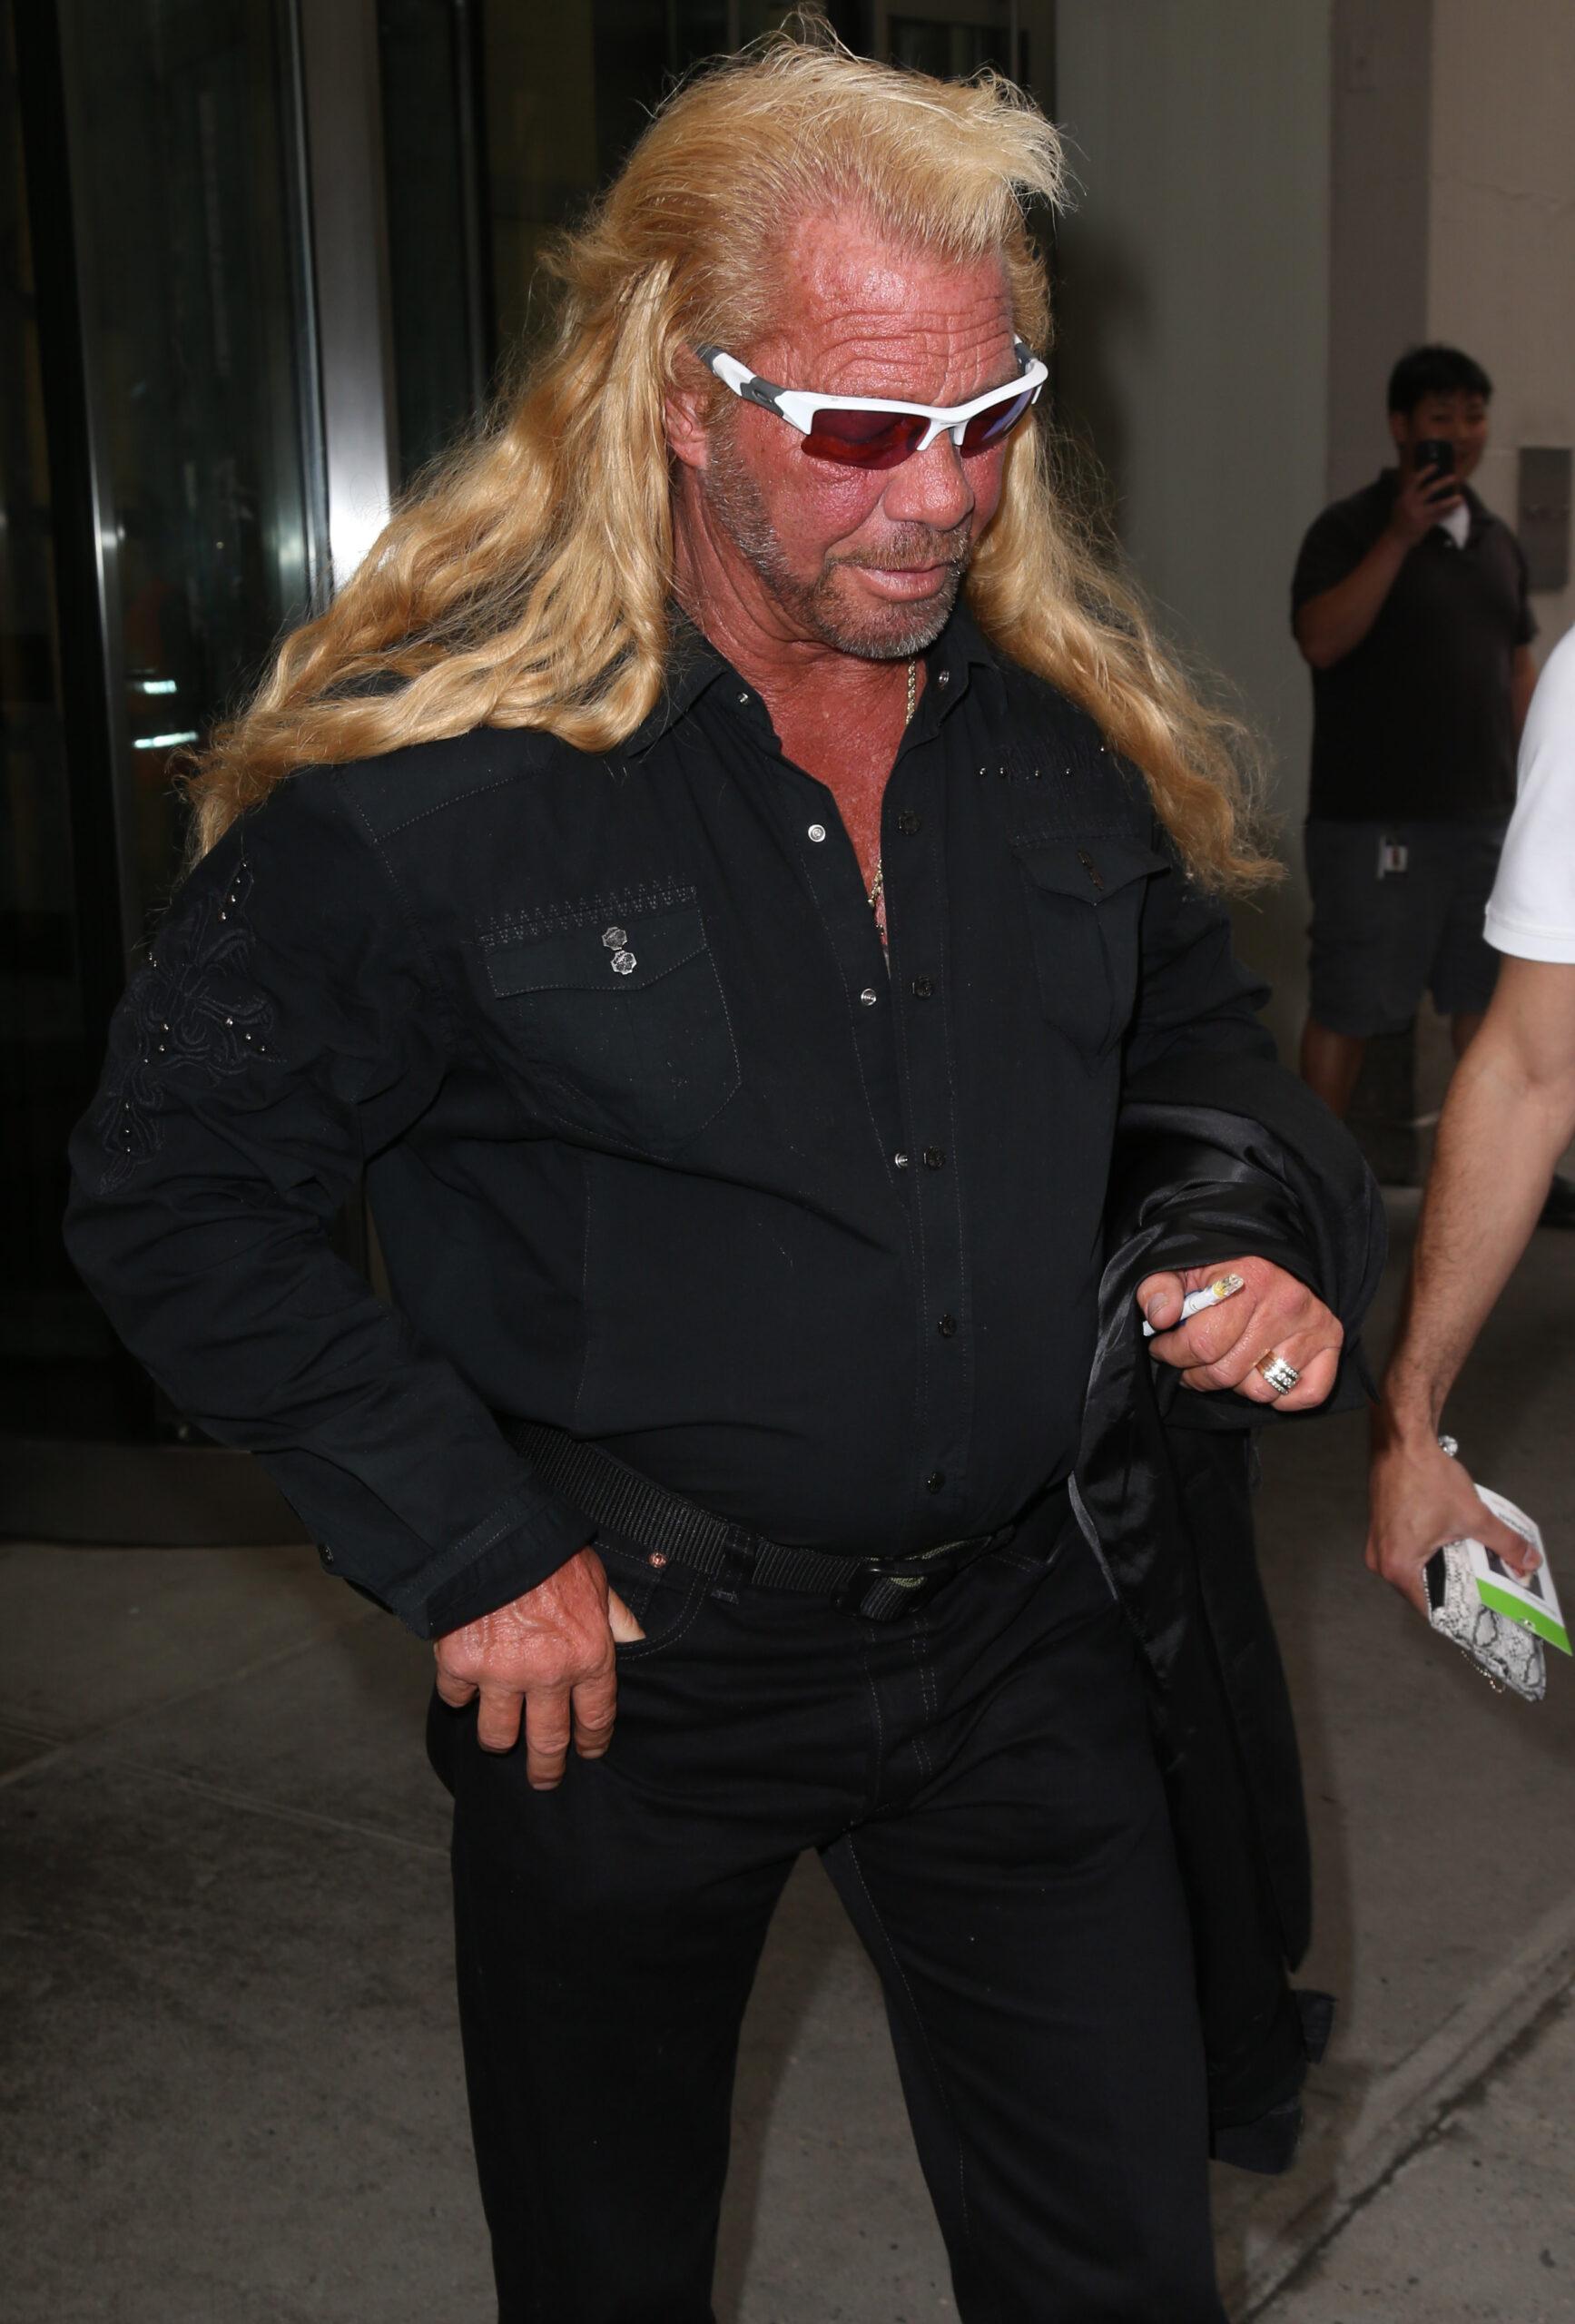 Duane 'Dog The Bounty Hunter' Chapman out and about